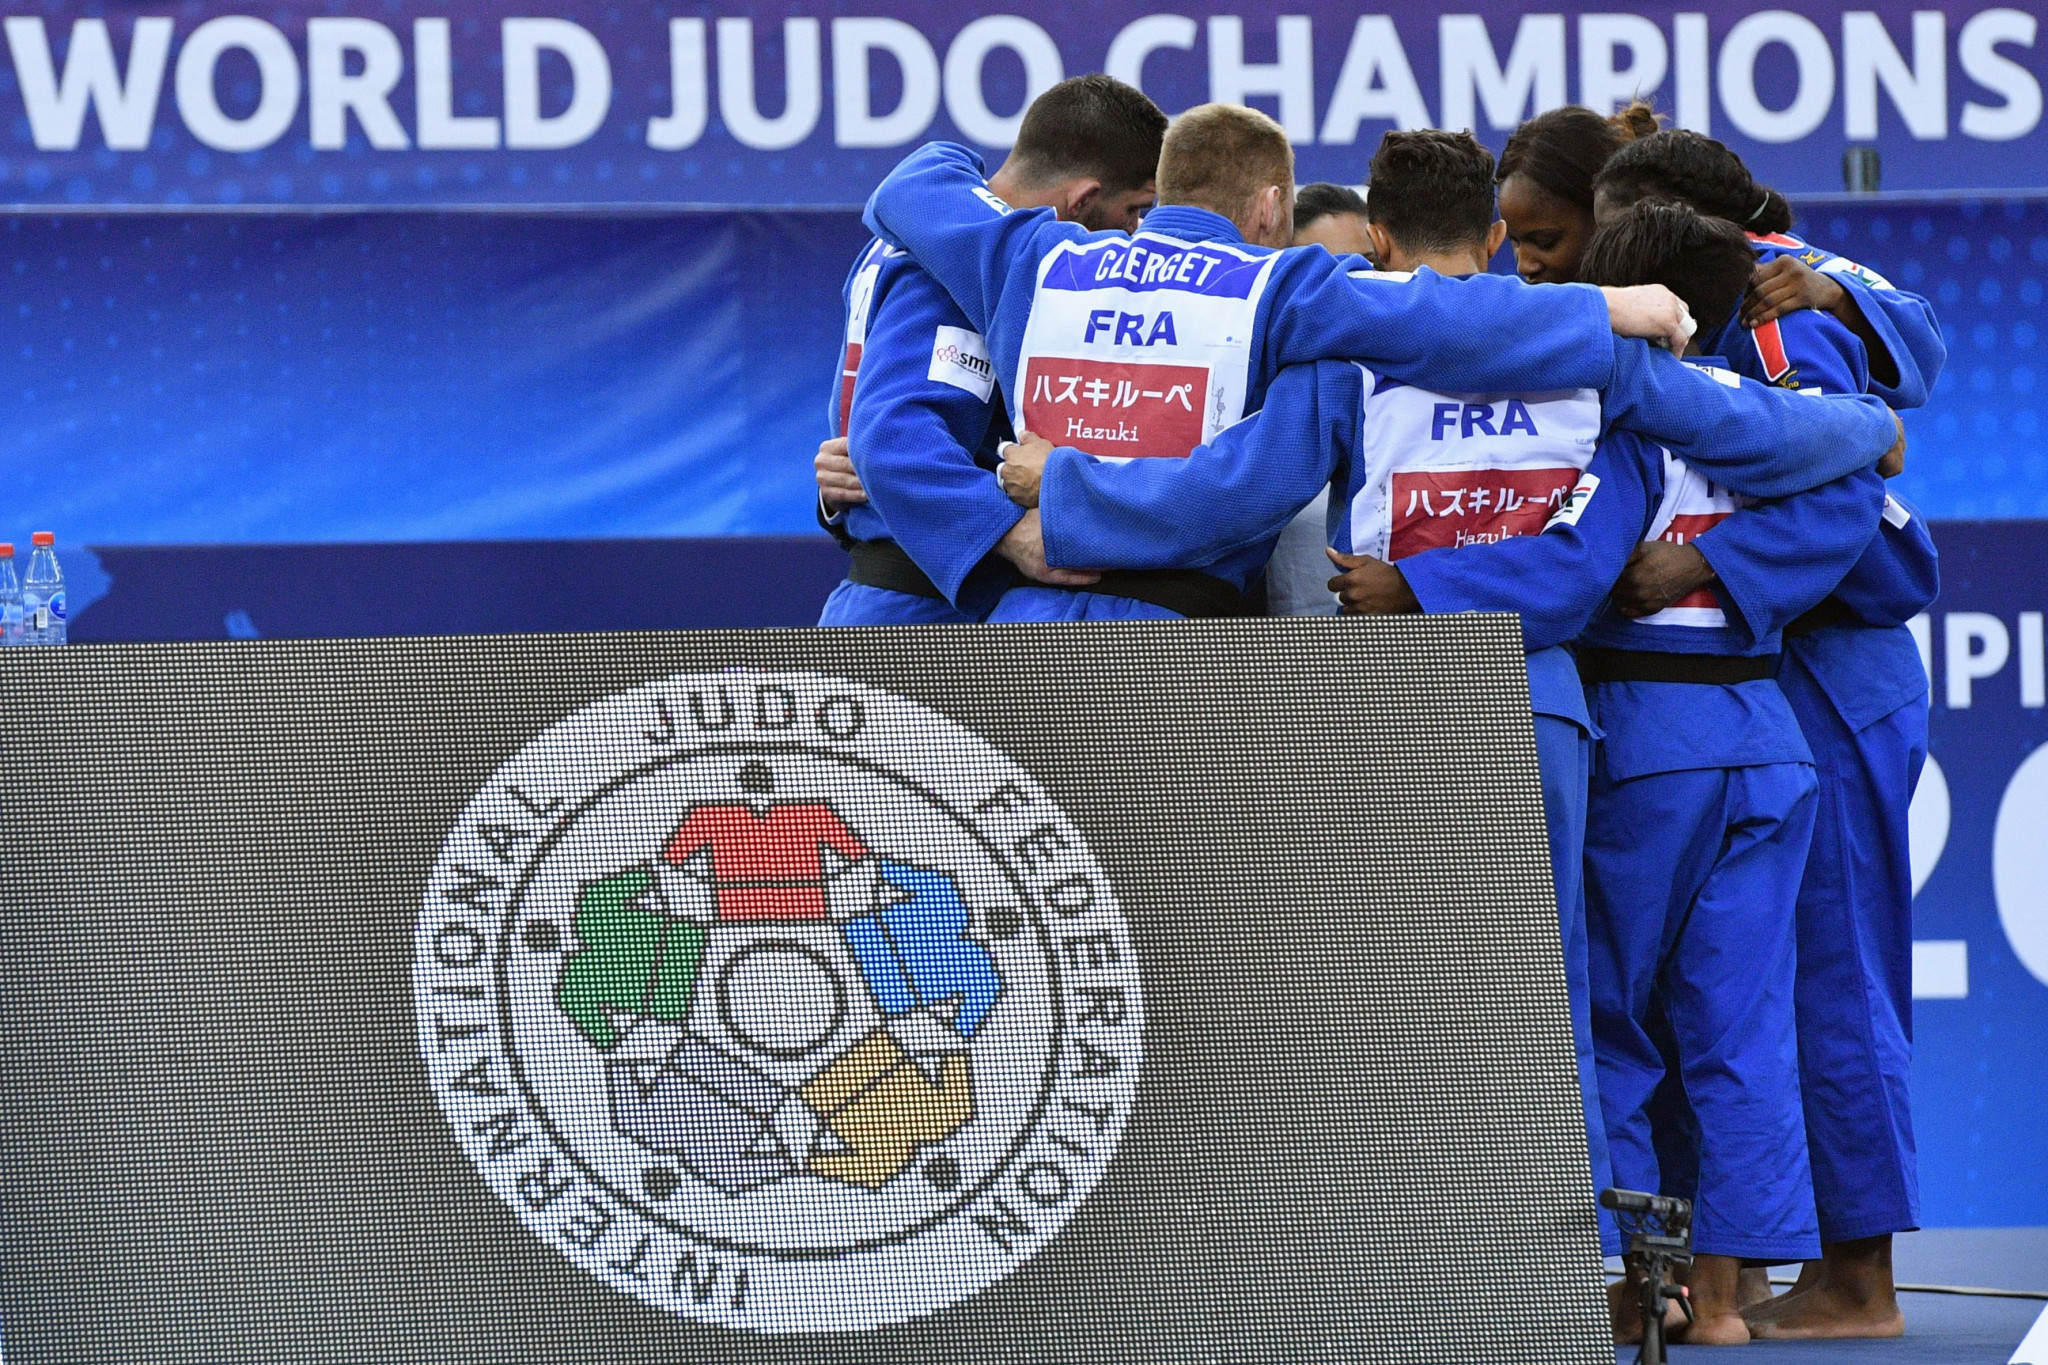 Japan aiming for hat-trick of mixed team titles at IJF World Championships